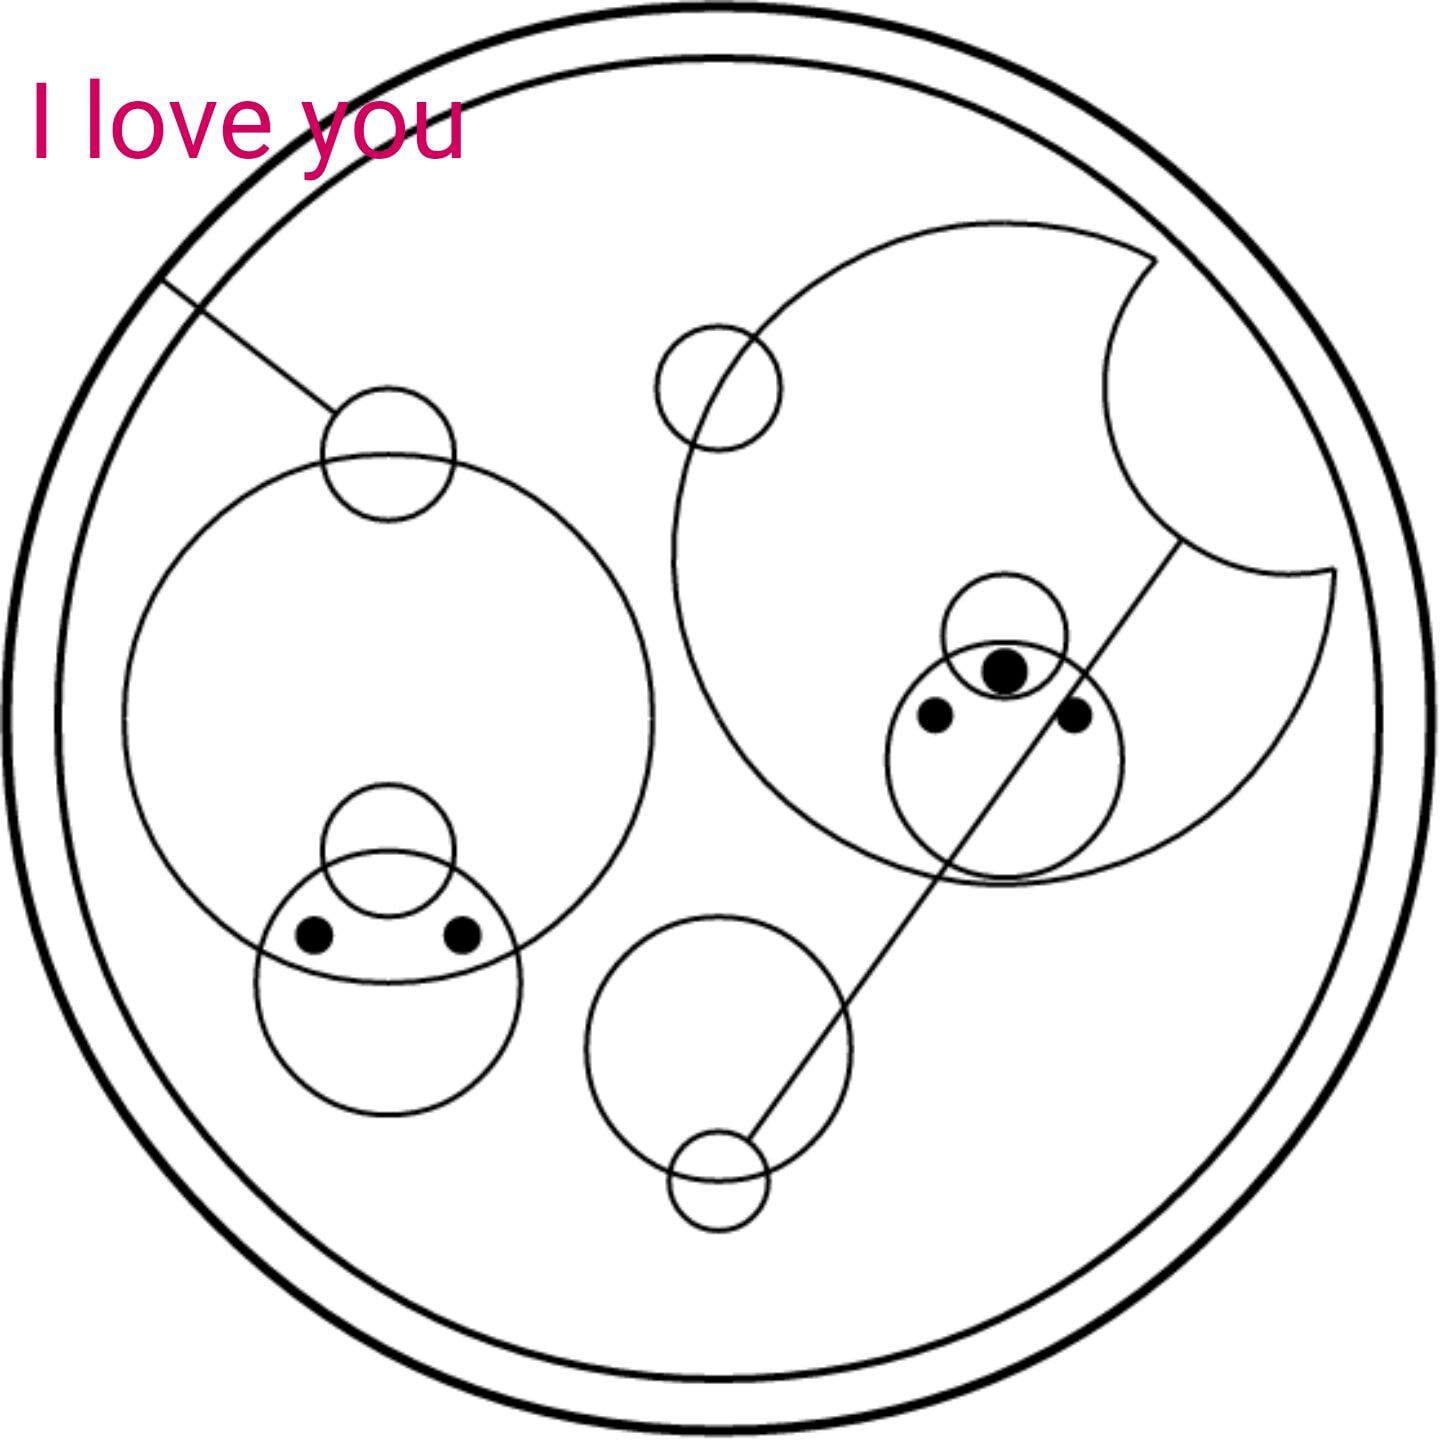 Your text in Gallifreyan by NerdiNeeds on Etsy